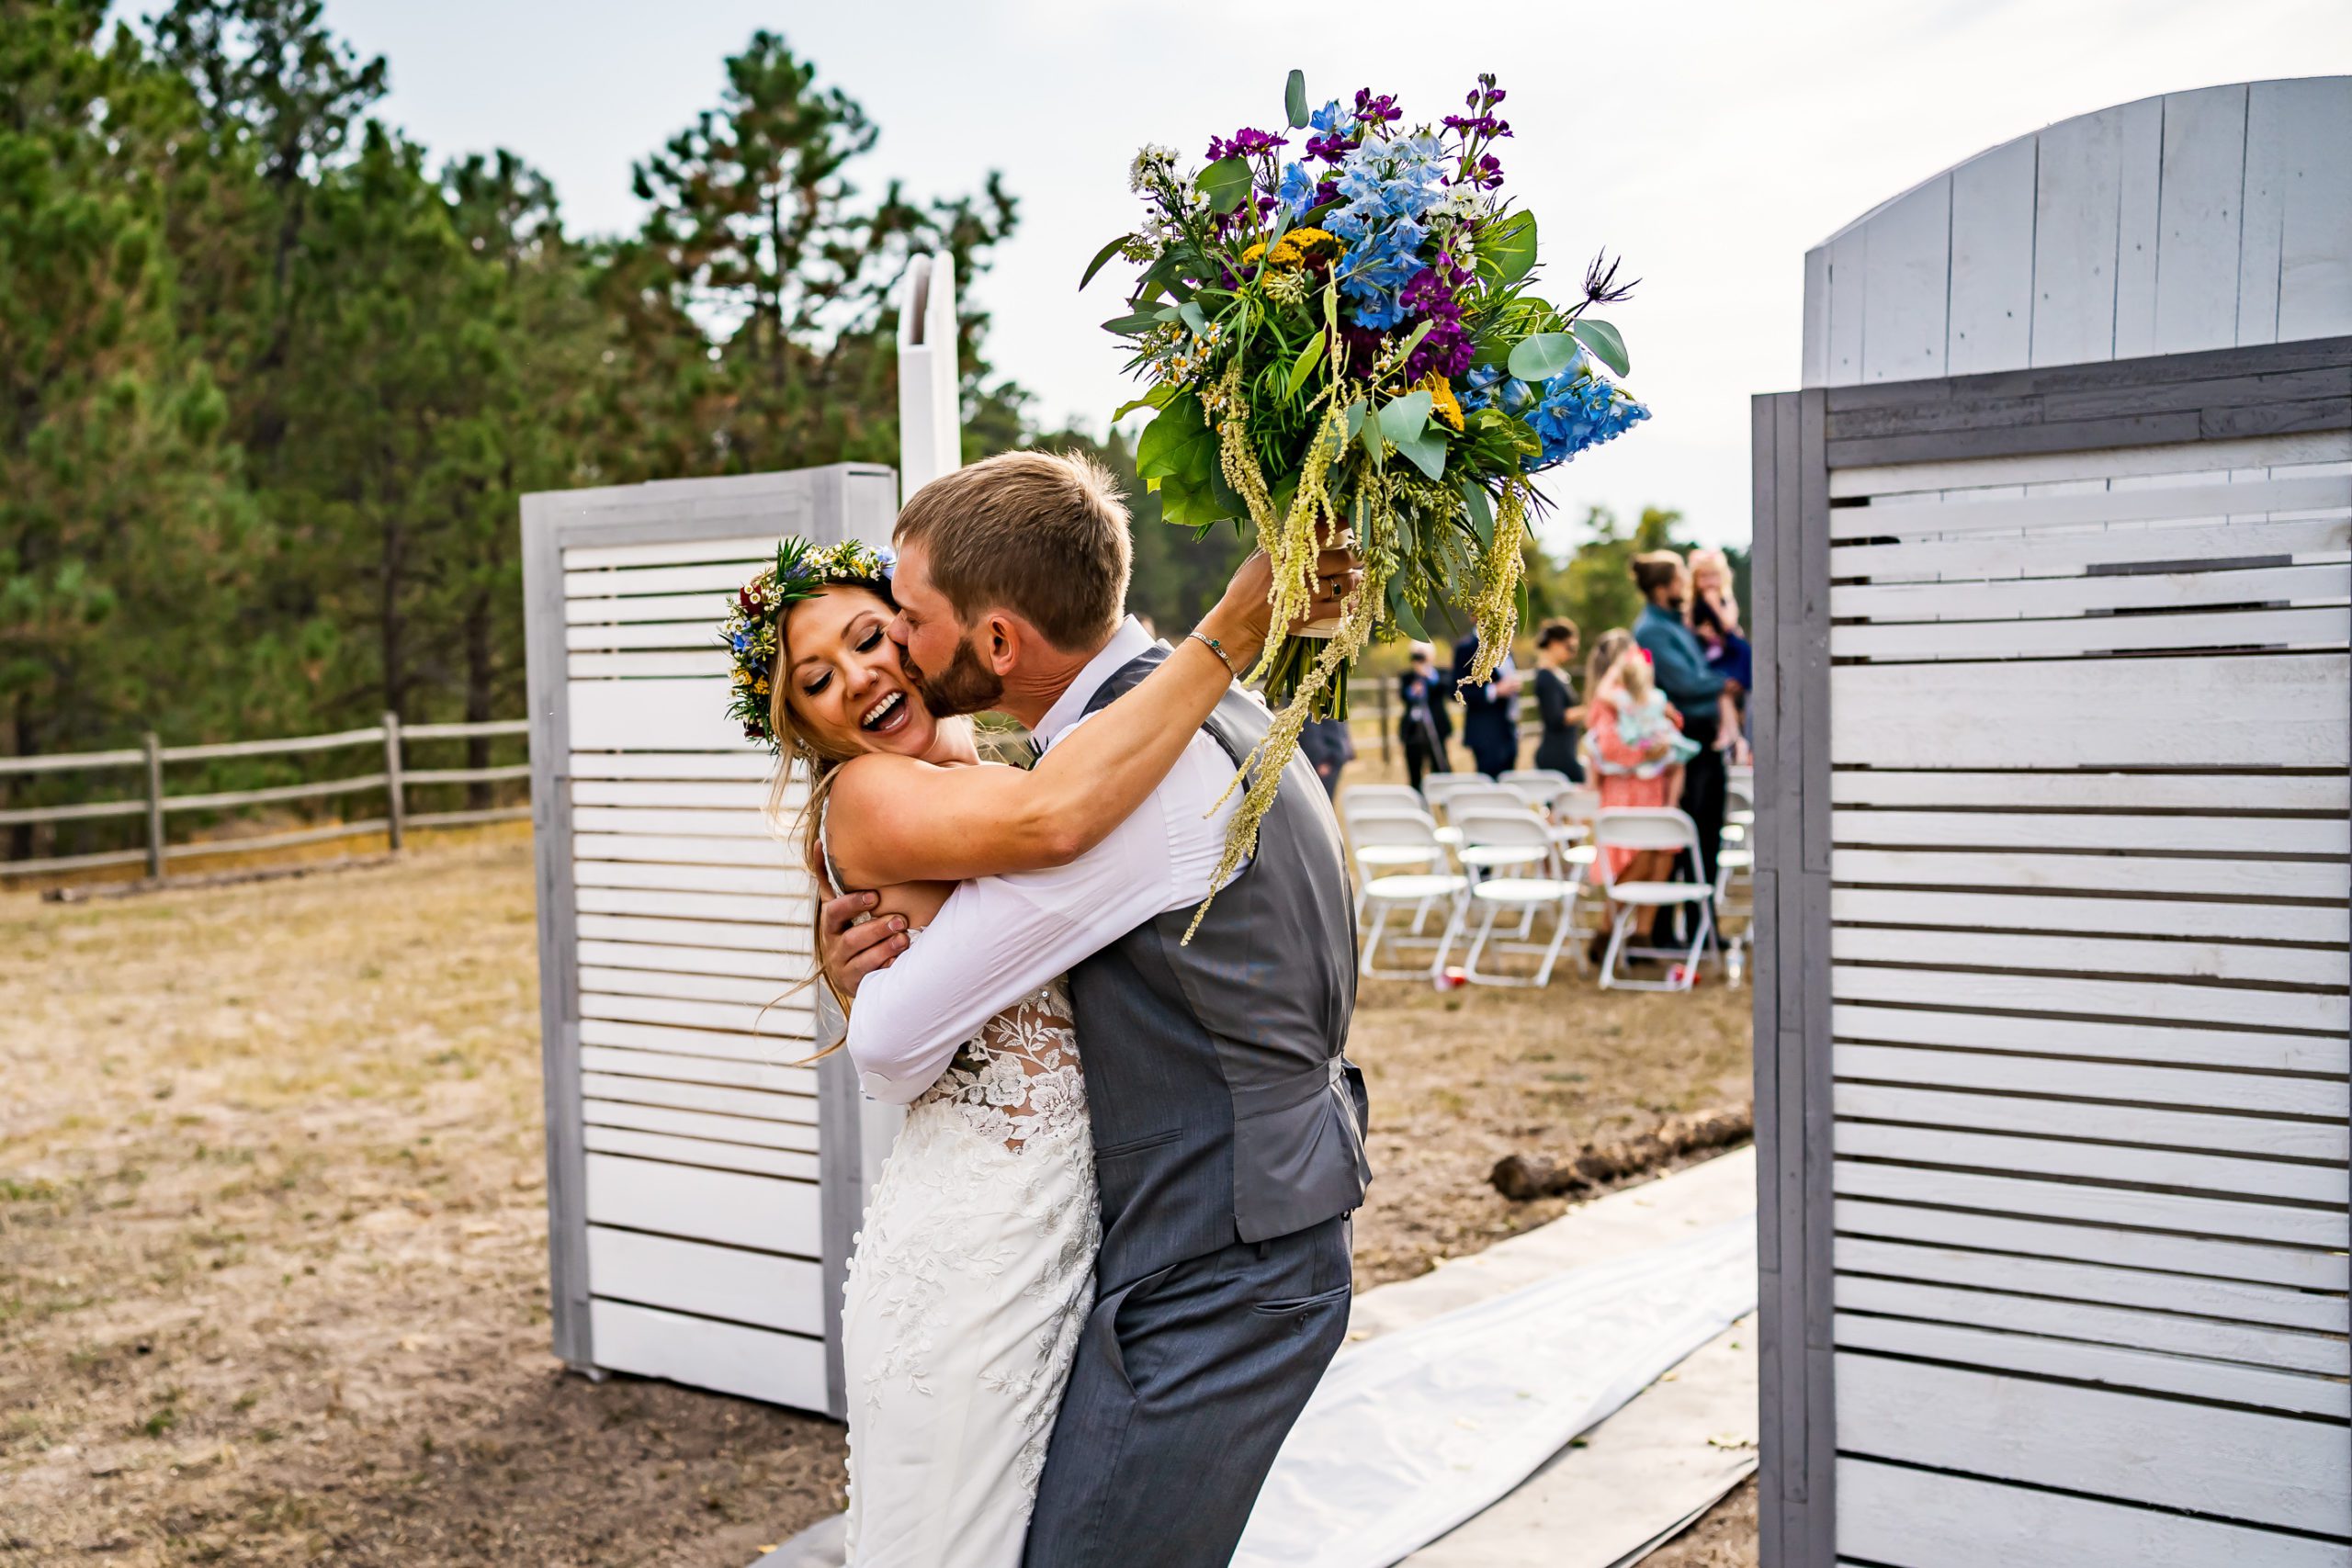 A groom kisses his bride after their backyard wedding ceremony.